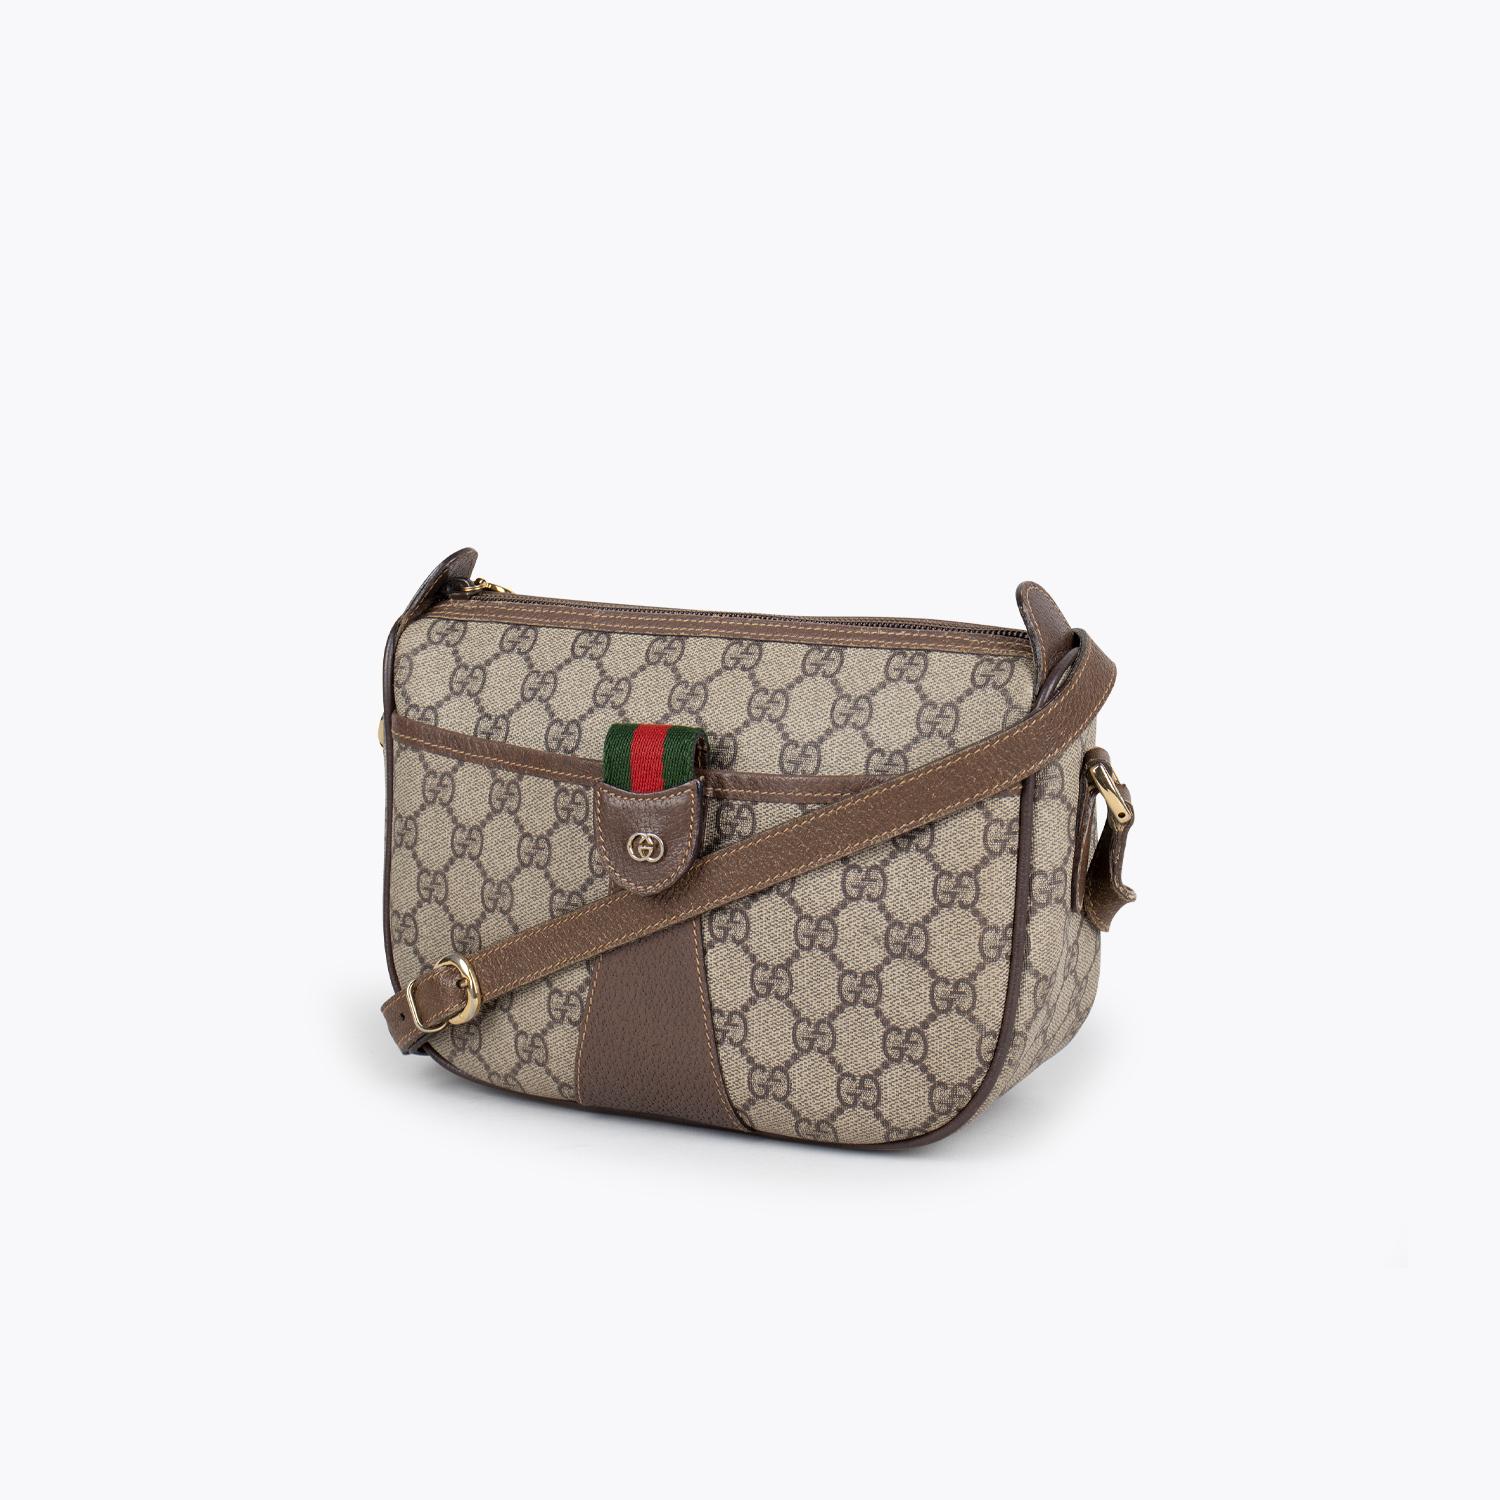 Beige and brown GG Plus coated canvas Gucci Ophidia crossbody bag with

- Gold-tone hardware
- Single flat shoulder strap
- Green and red striped canvas lining
- Dual pockets at interior walls; one with zip closure and zip closure at top

Overall